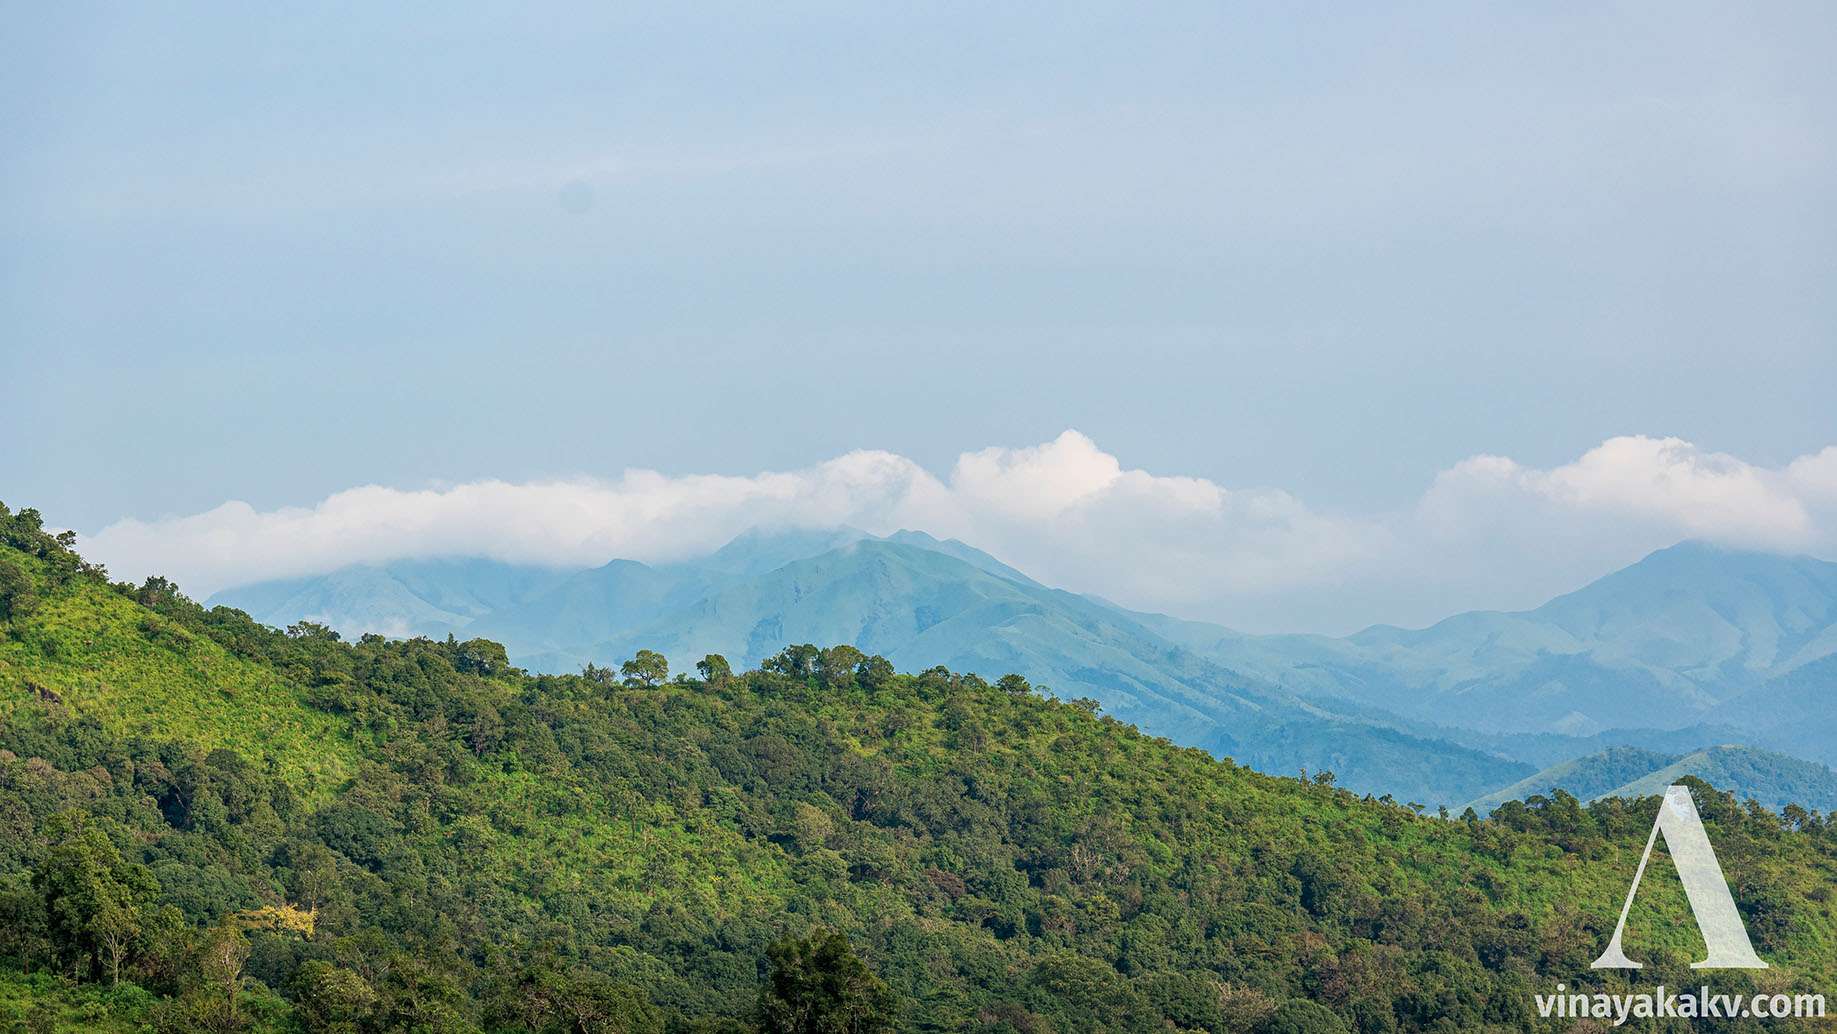 The Shola Mountains of Kuduremukha Natioanl Park, covered with mist and haze